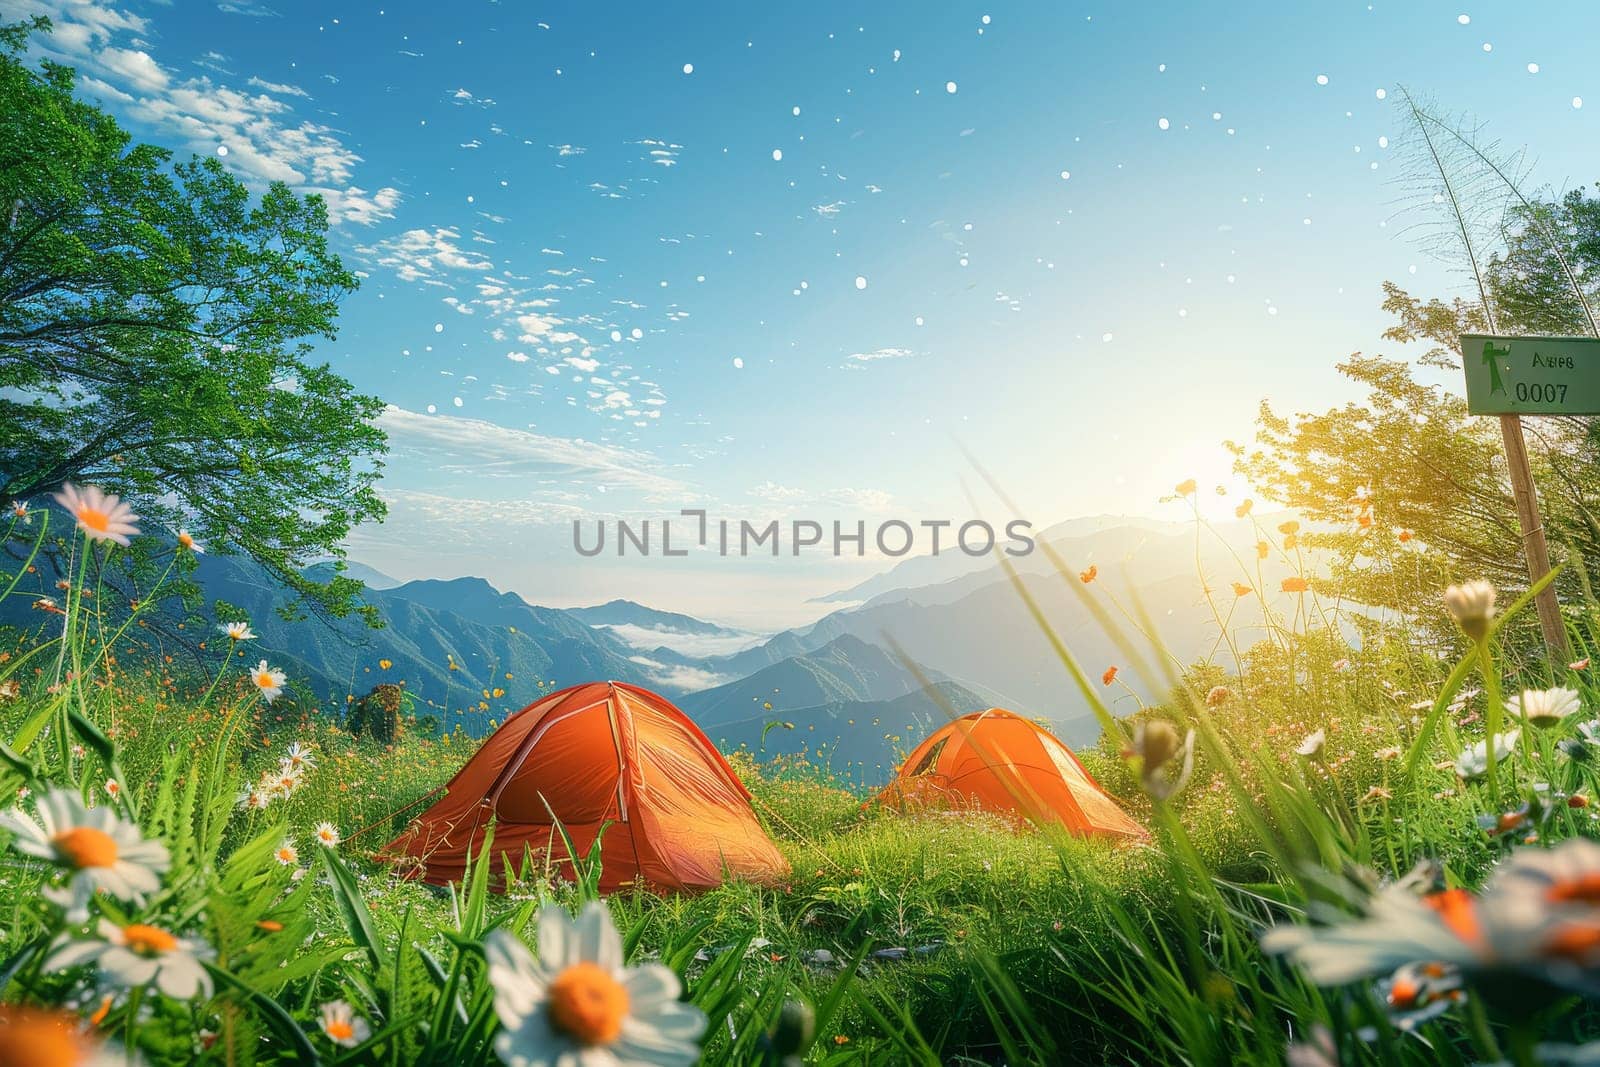 Two orange tents are set up in a grassy field with a beautiful view of the mountains. The scene is peaceful and serene, with the sun shining brightly